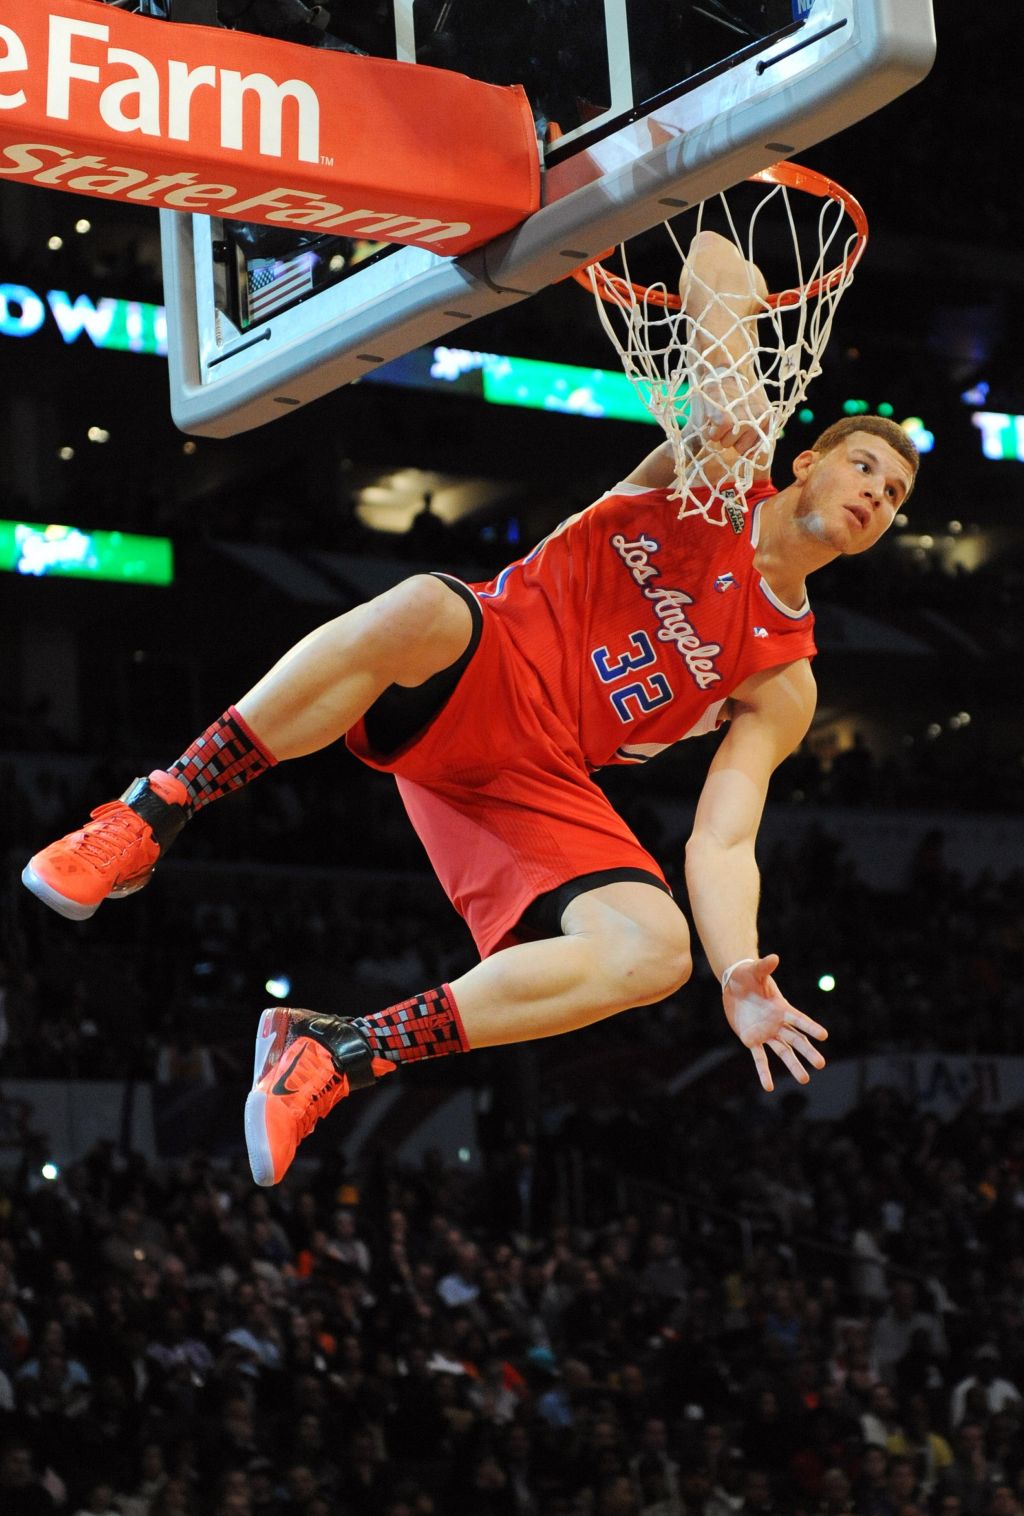 Blake Griffin from the L.A. Clippers sla